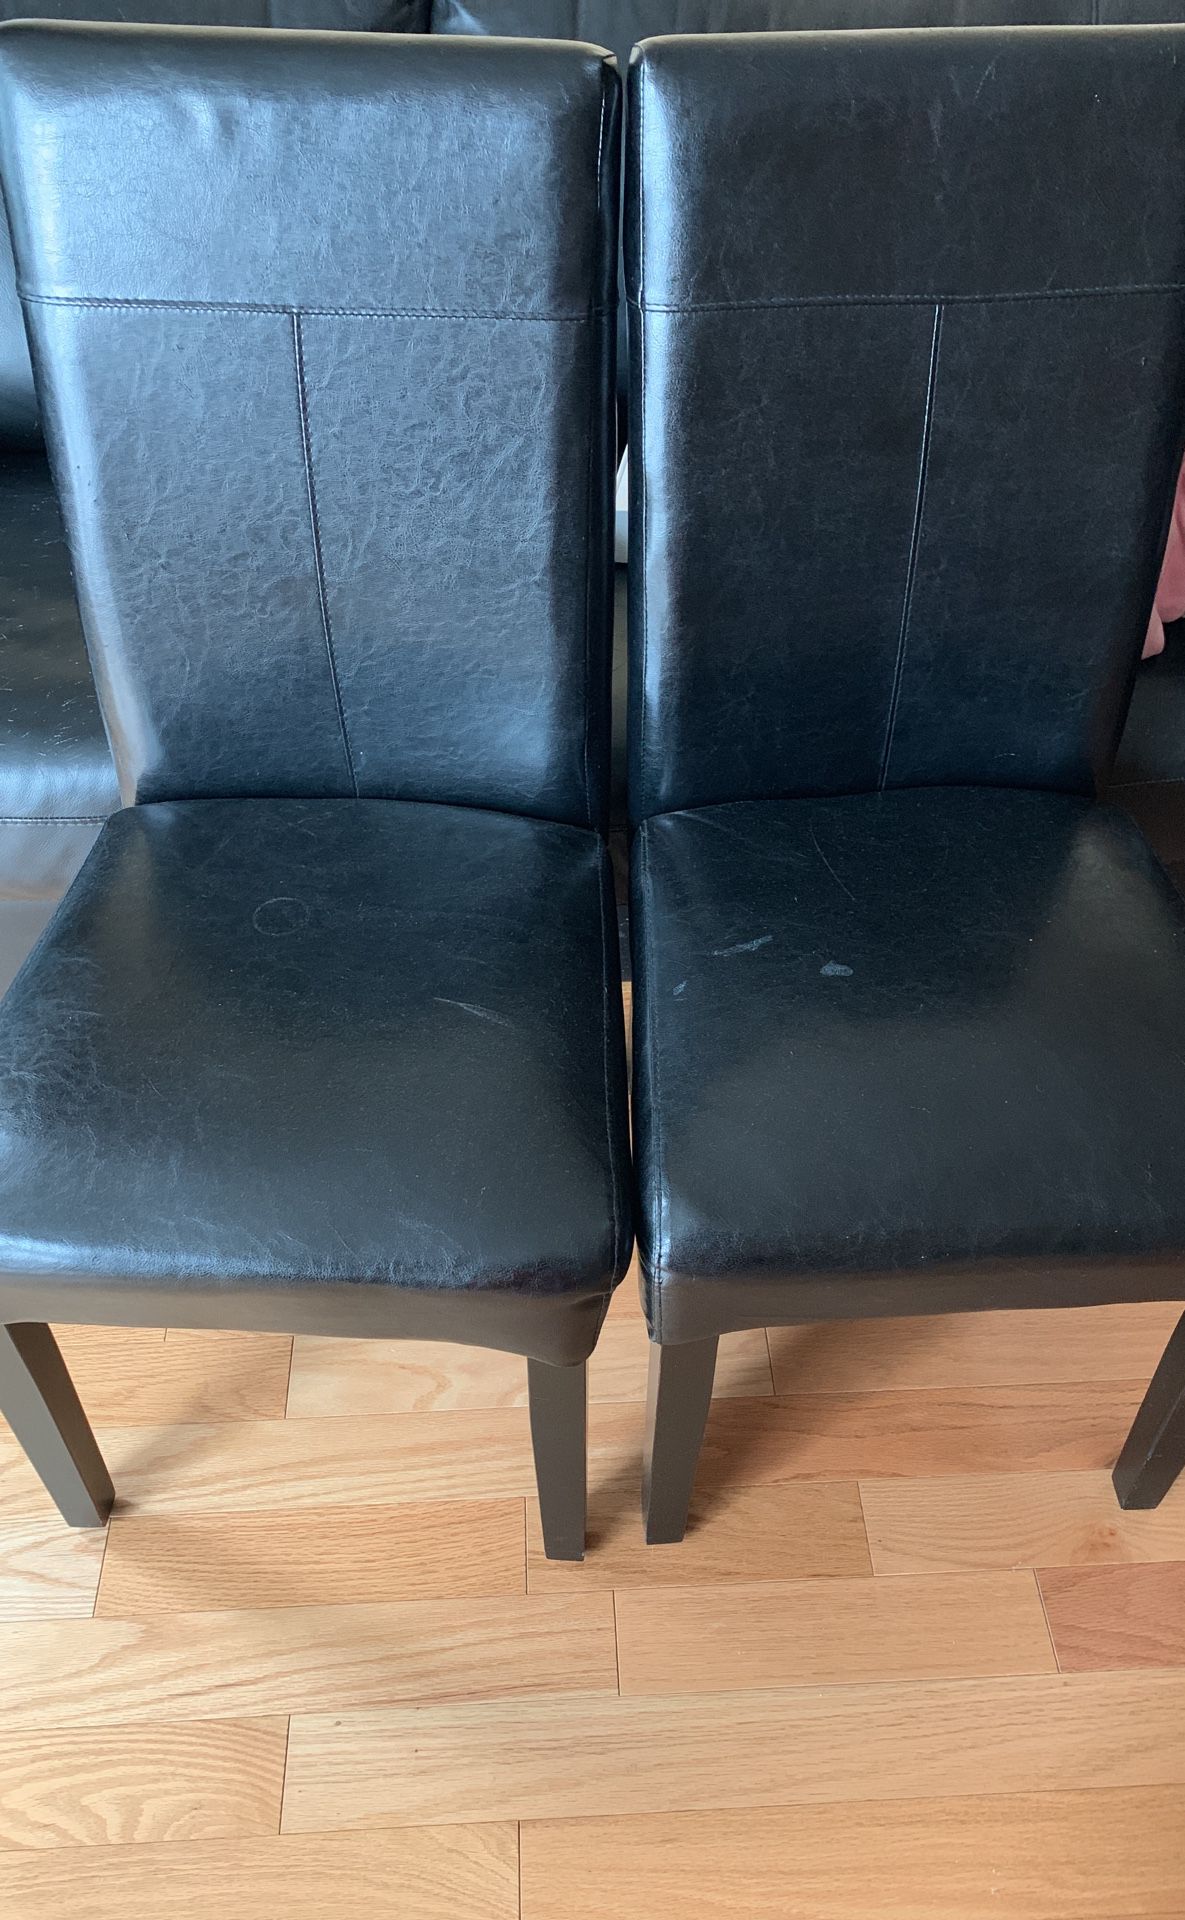 Two chairs for free!